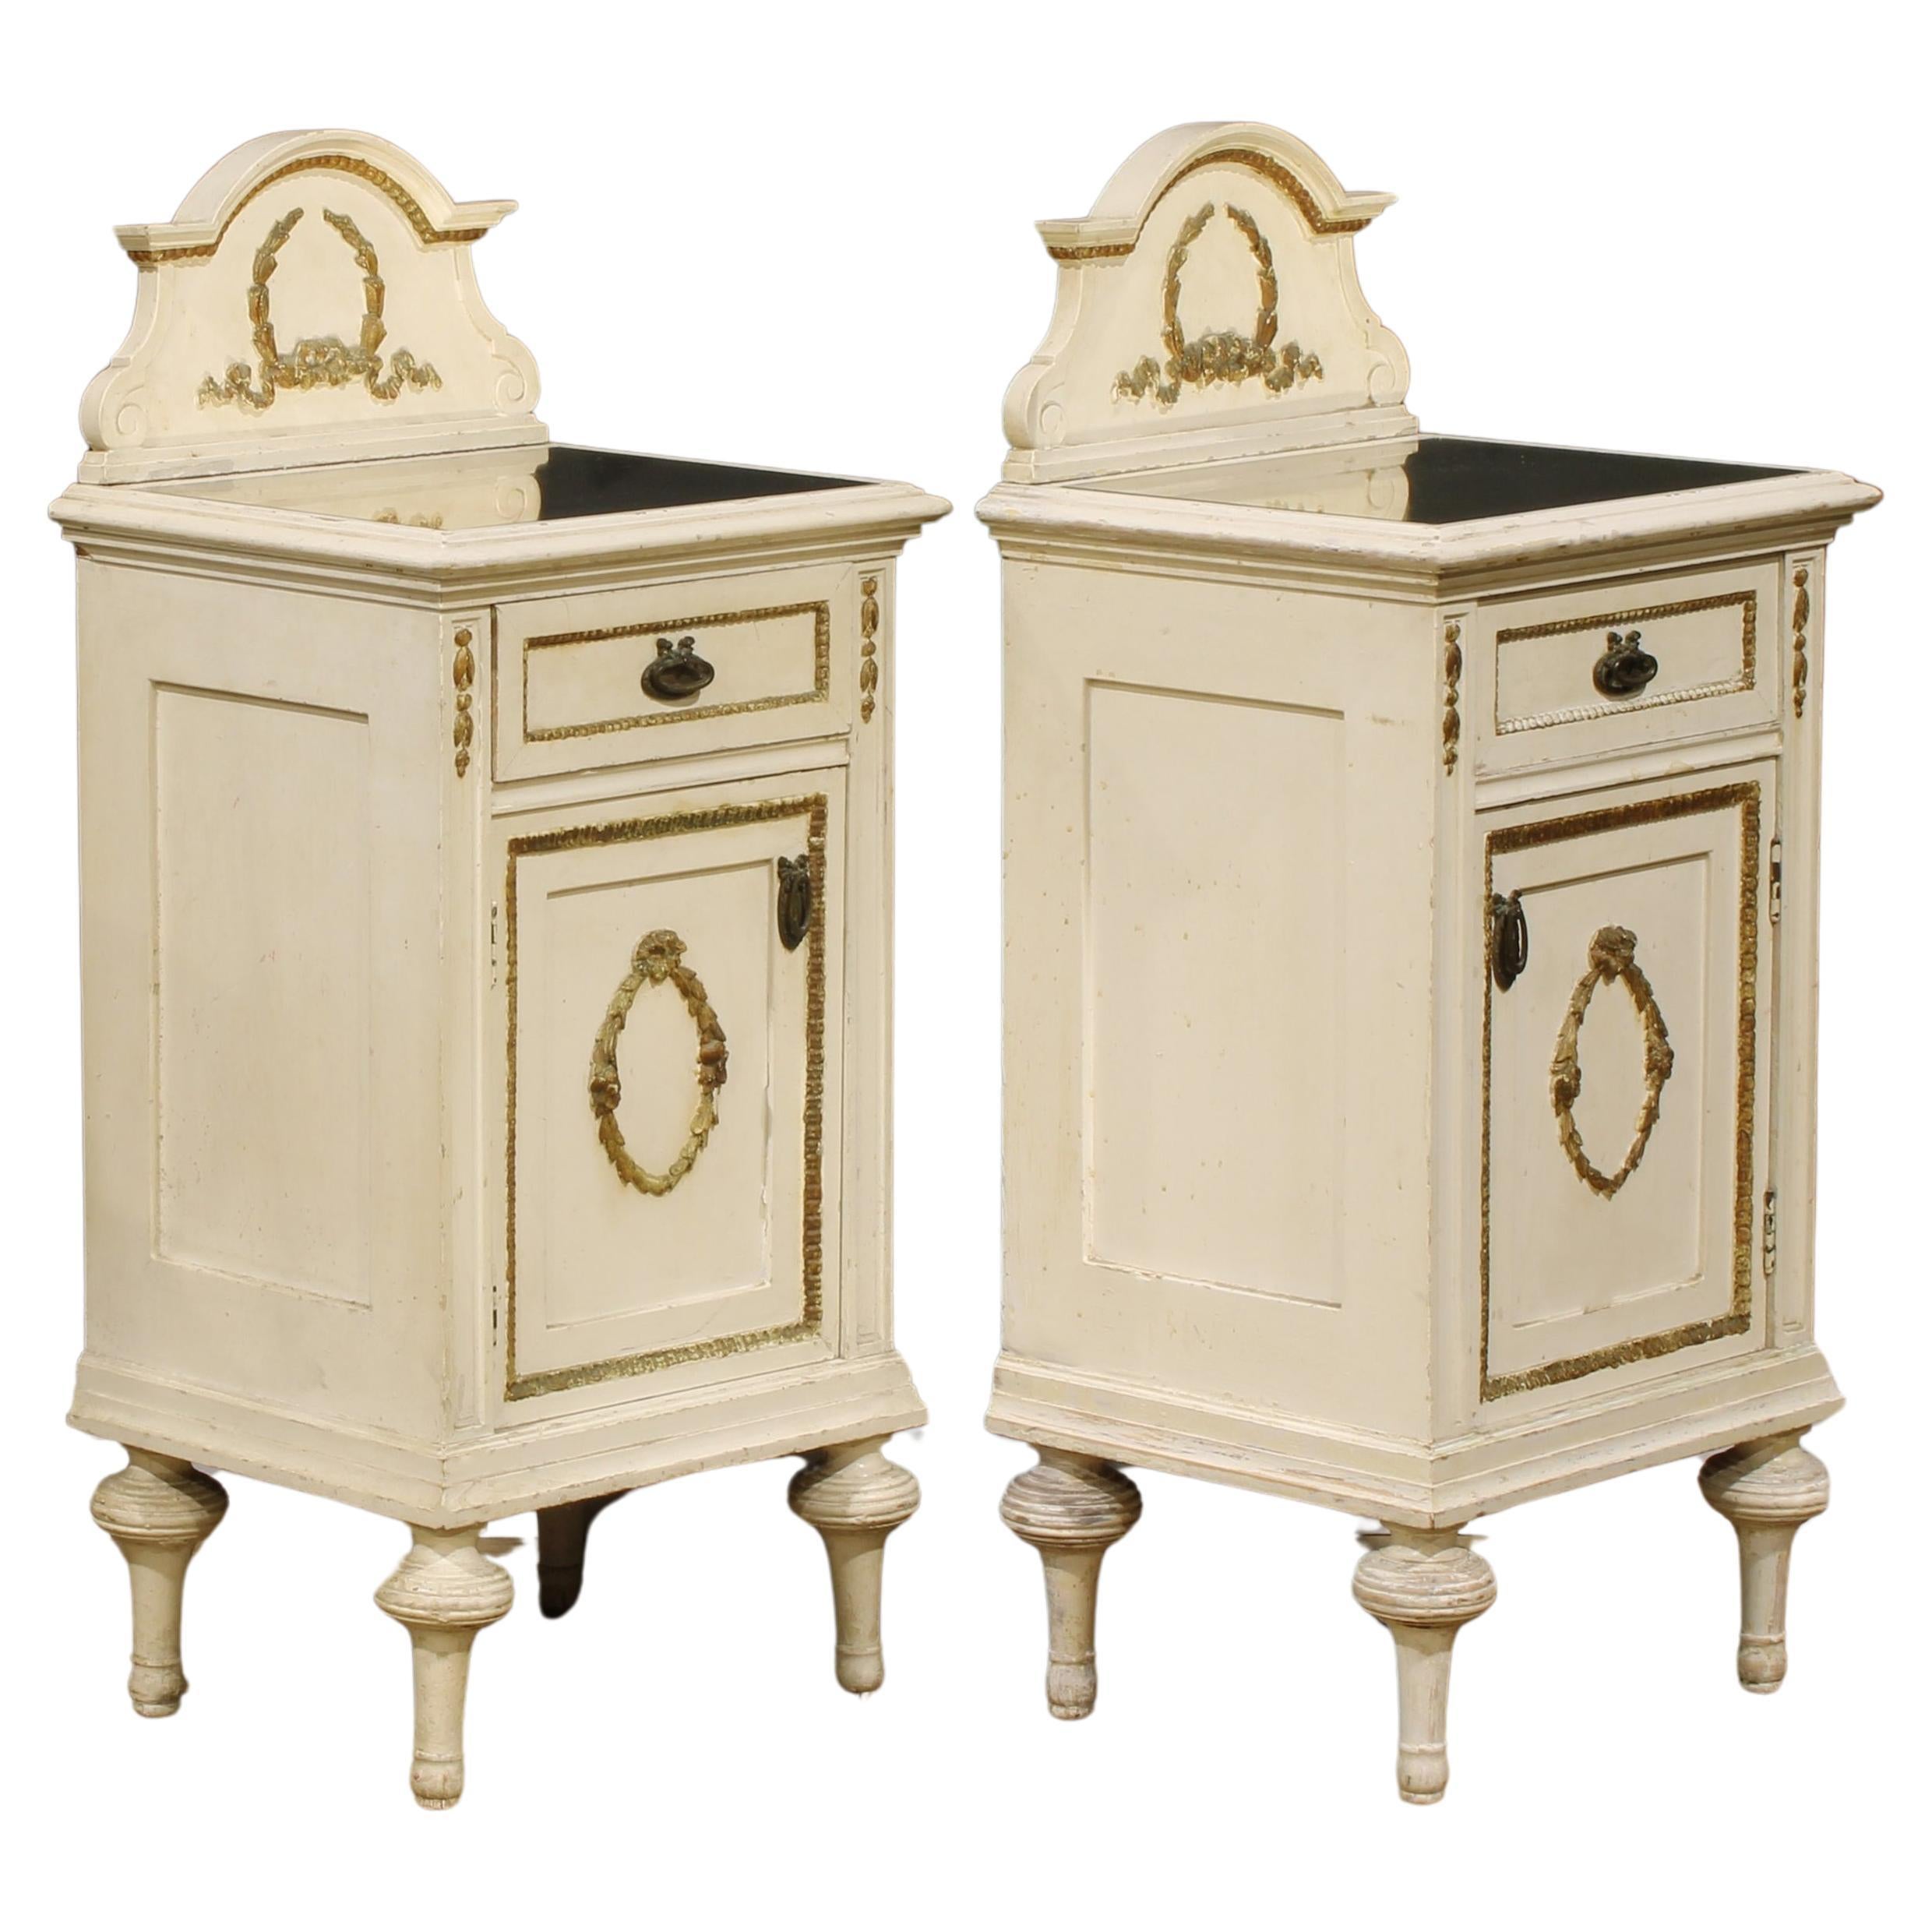 Pair of 19th Century French Louis XVI Carved Painted Nightstands Bedside Tables For Sale